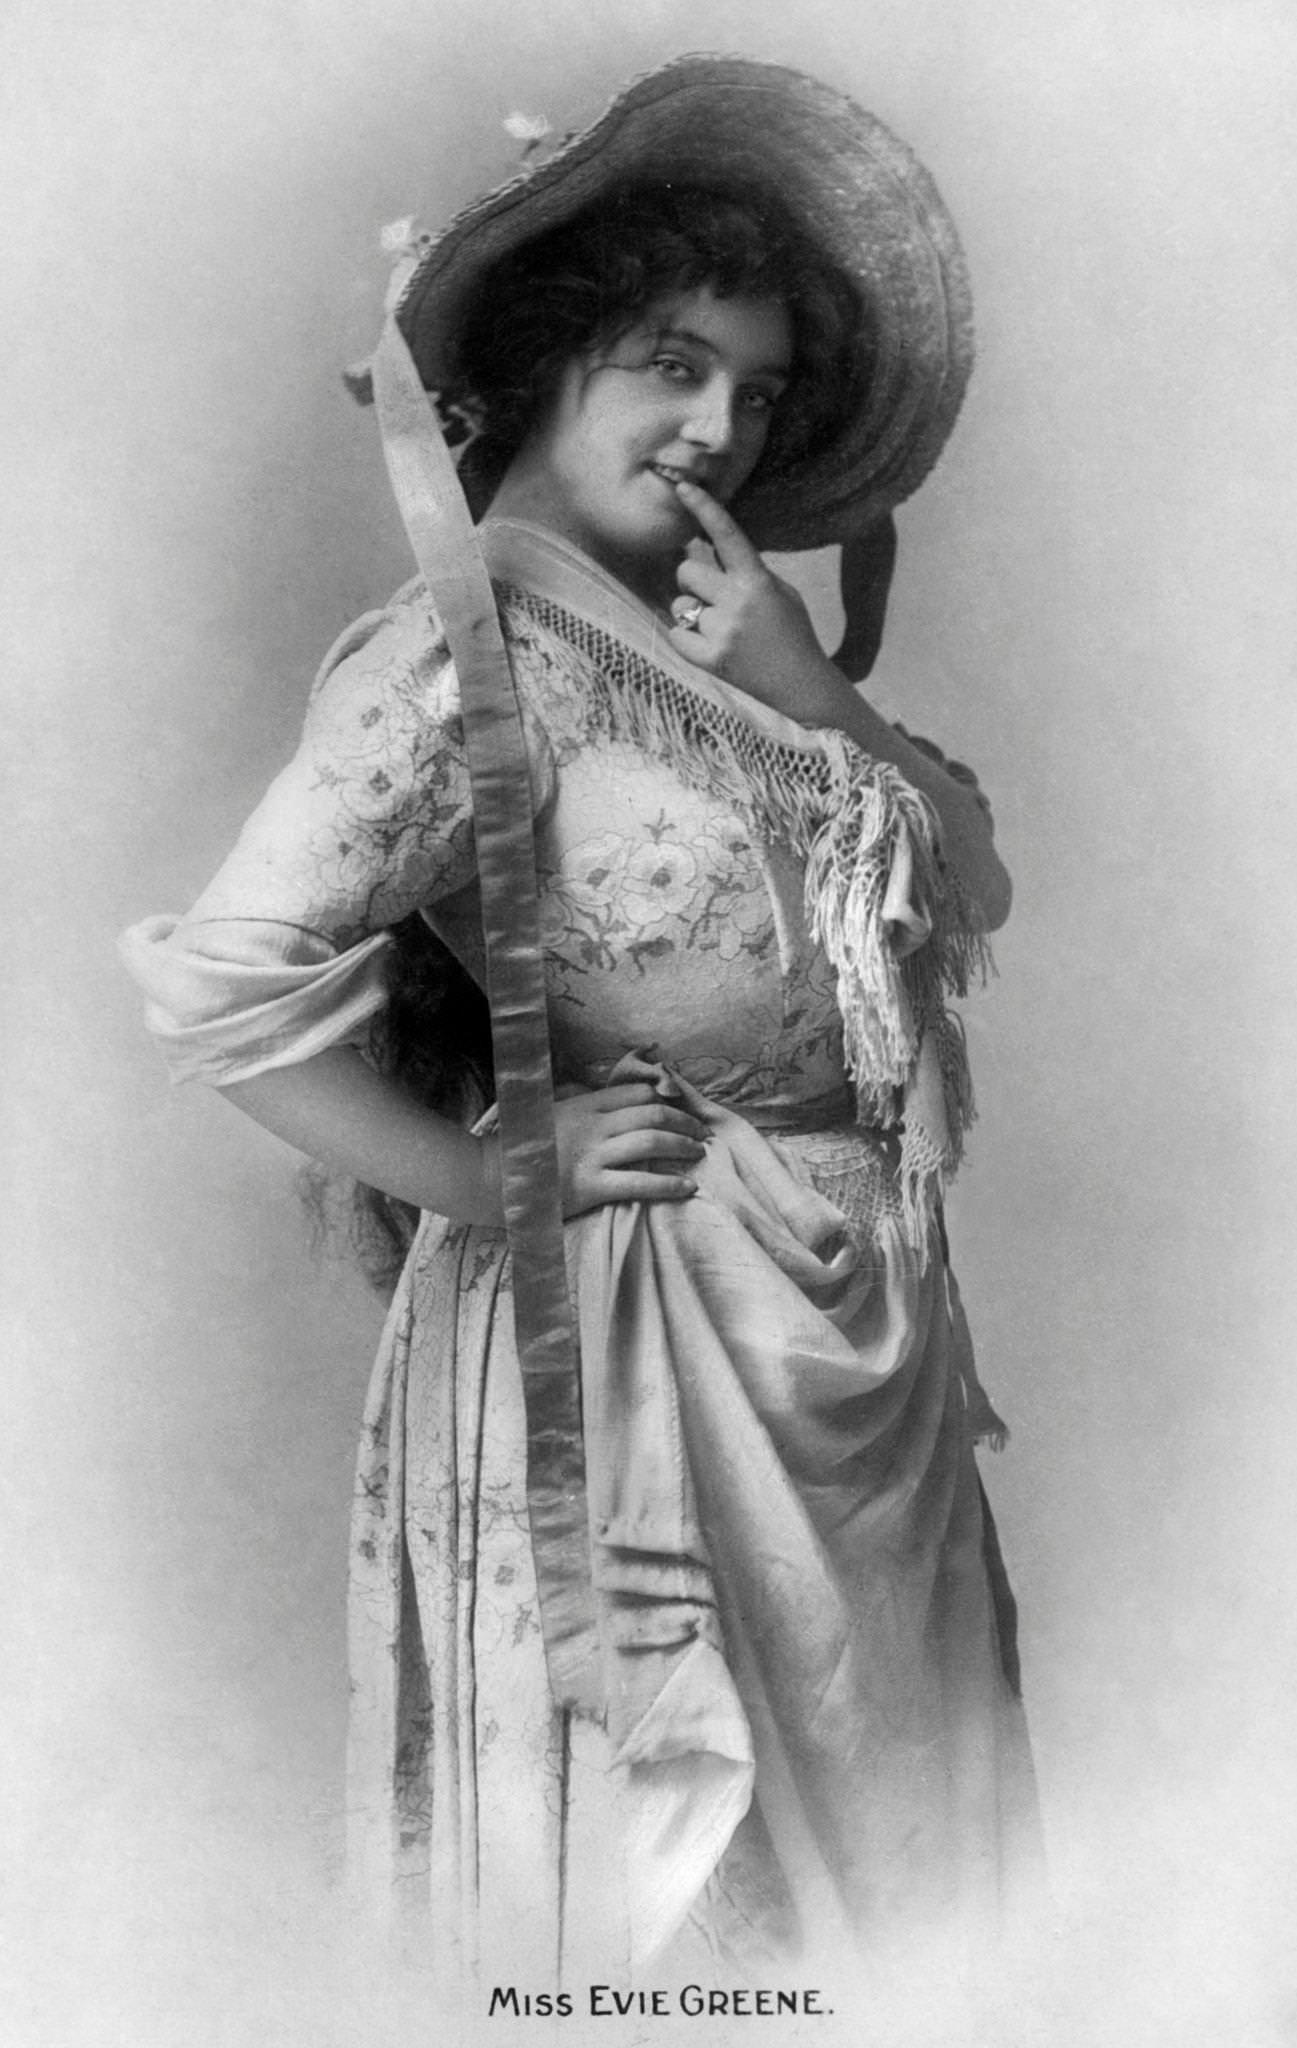 Edna May poses for a portrait in the early 1900s